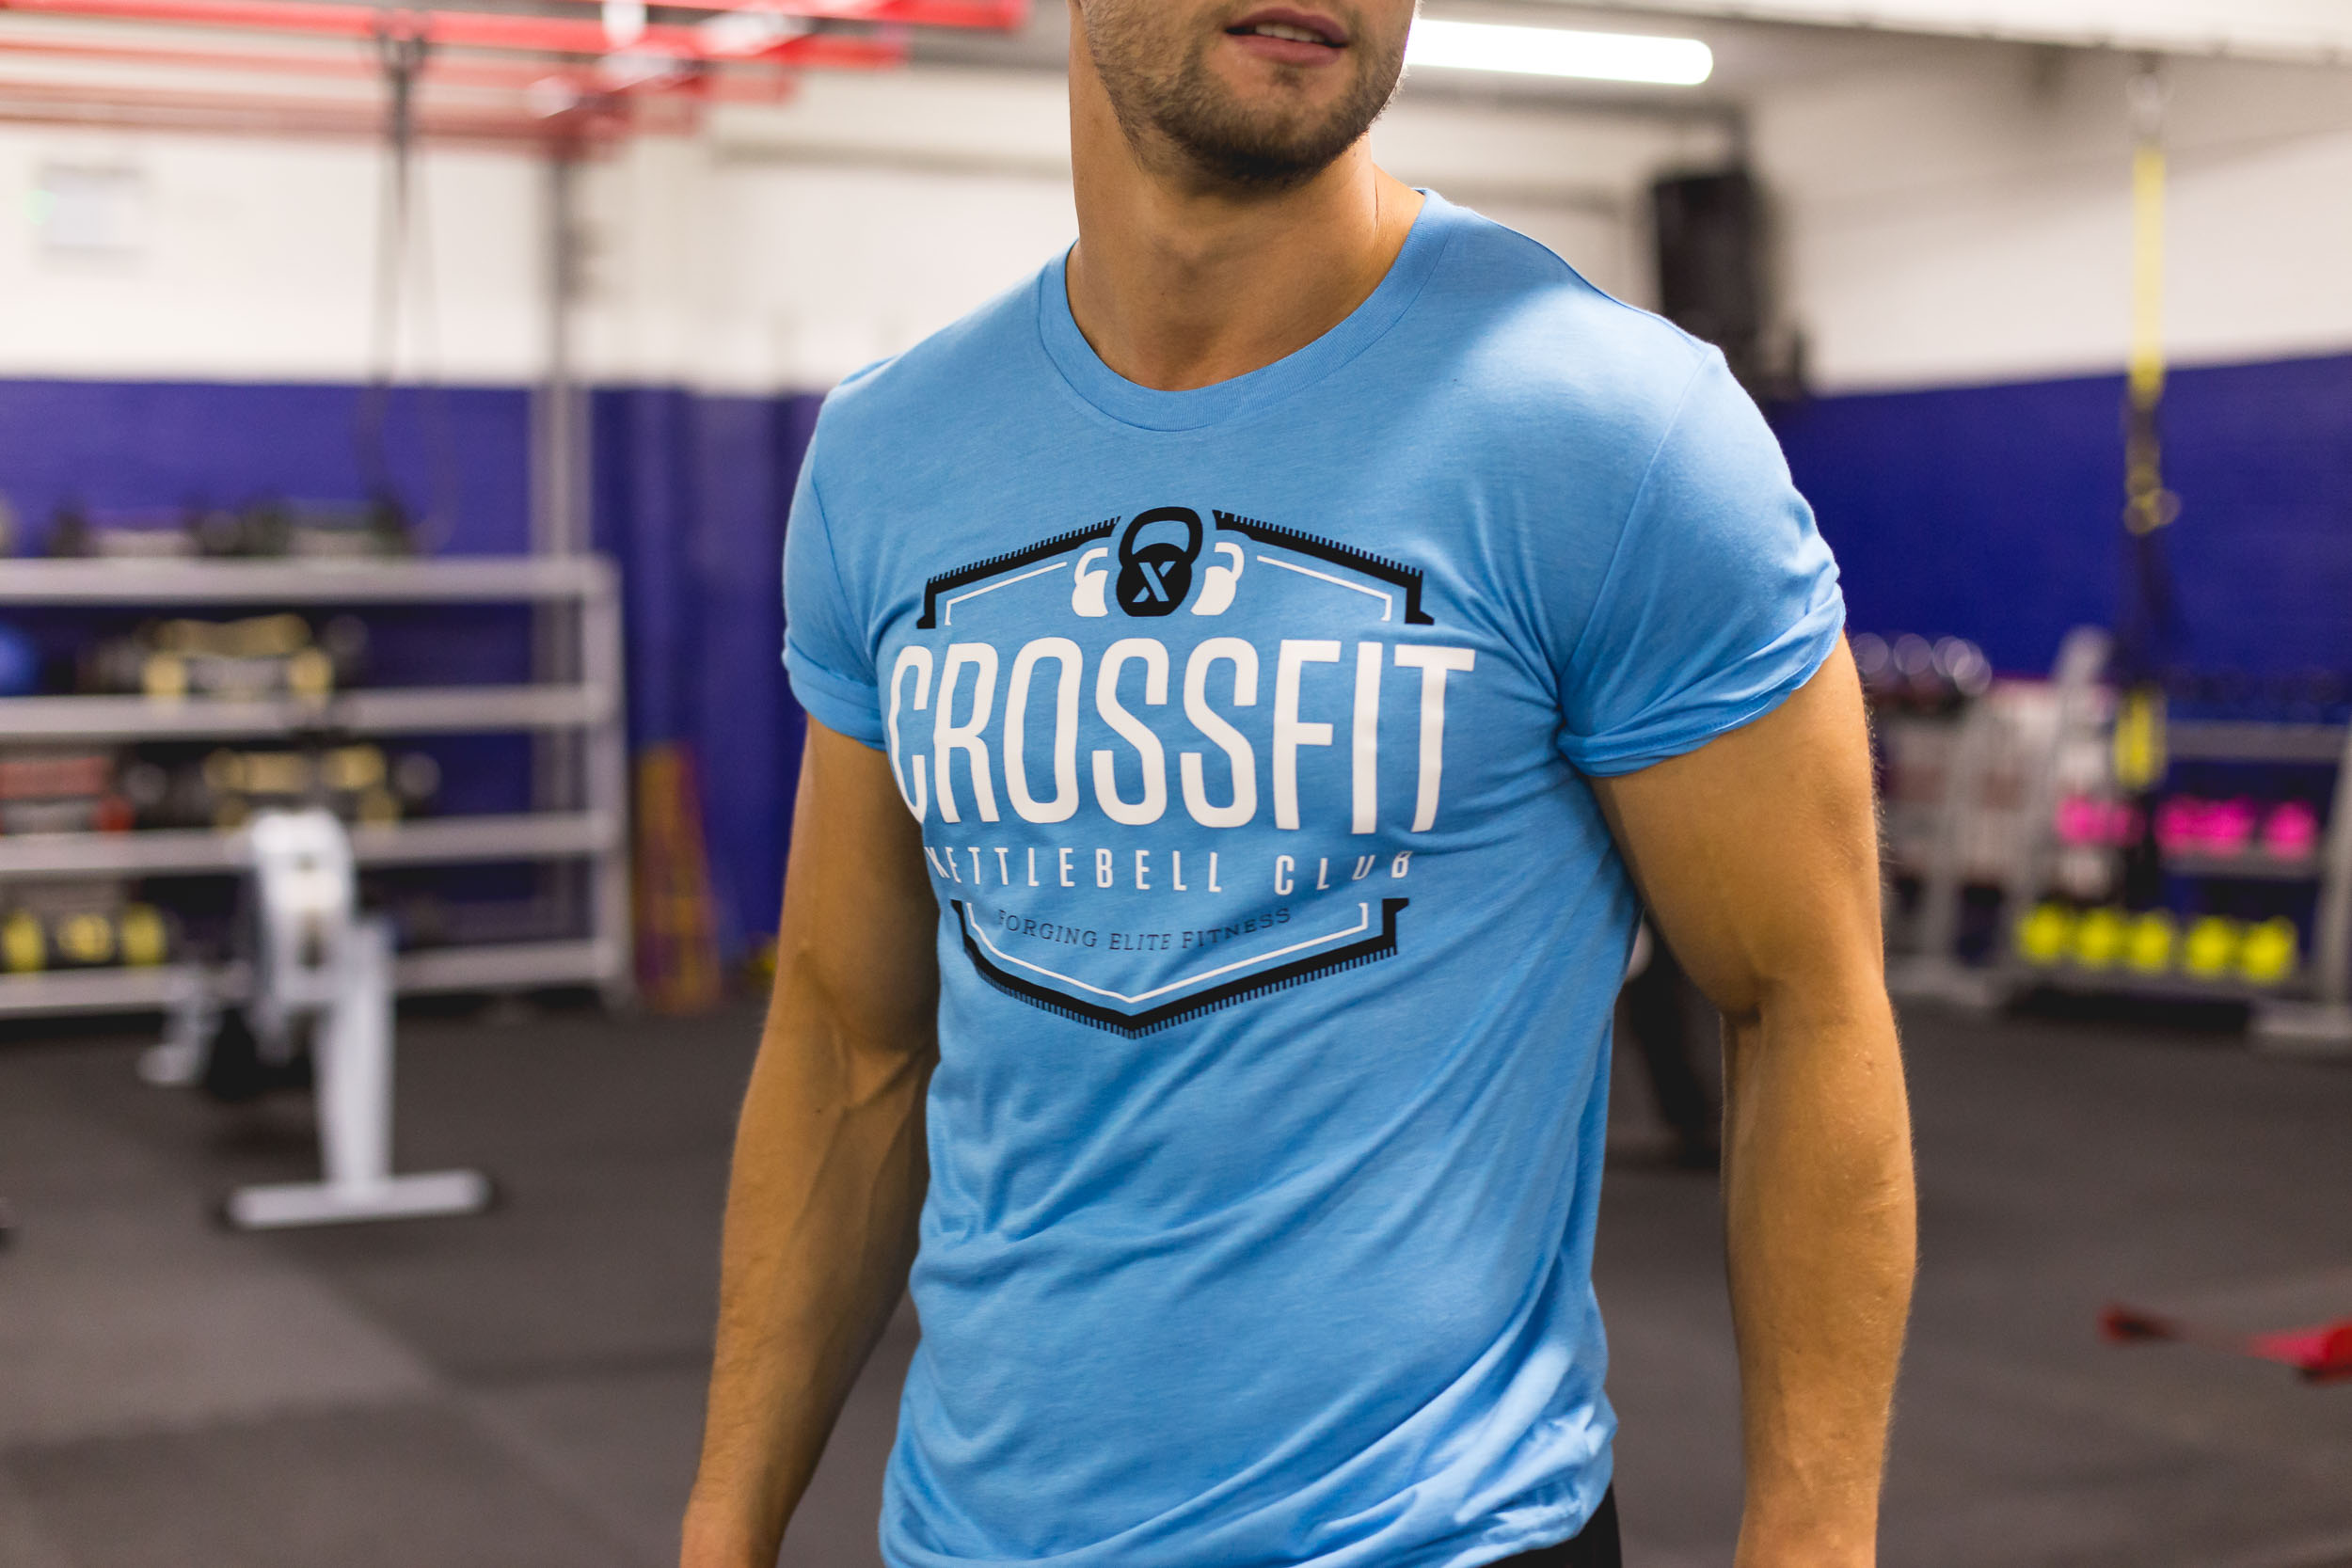 crossfit clothing